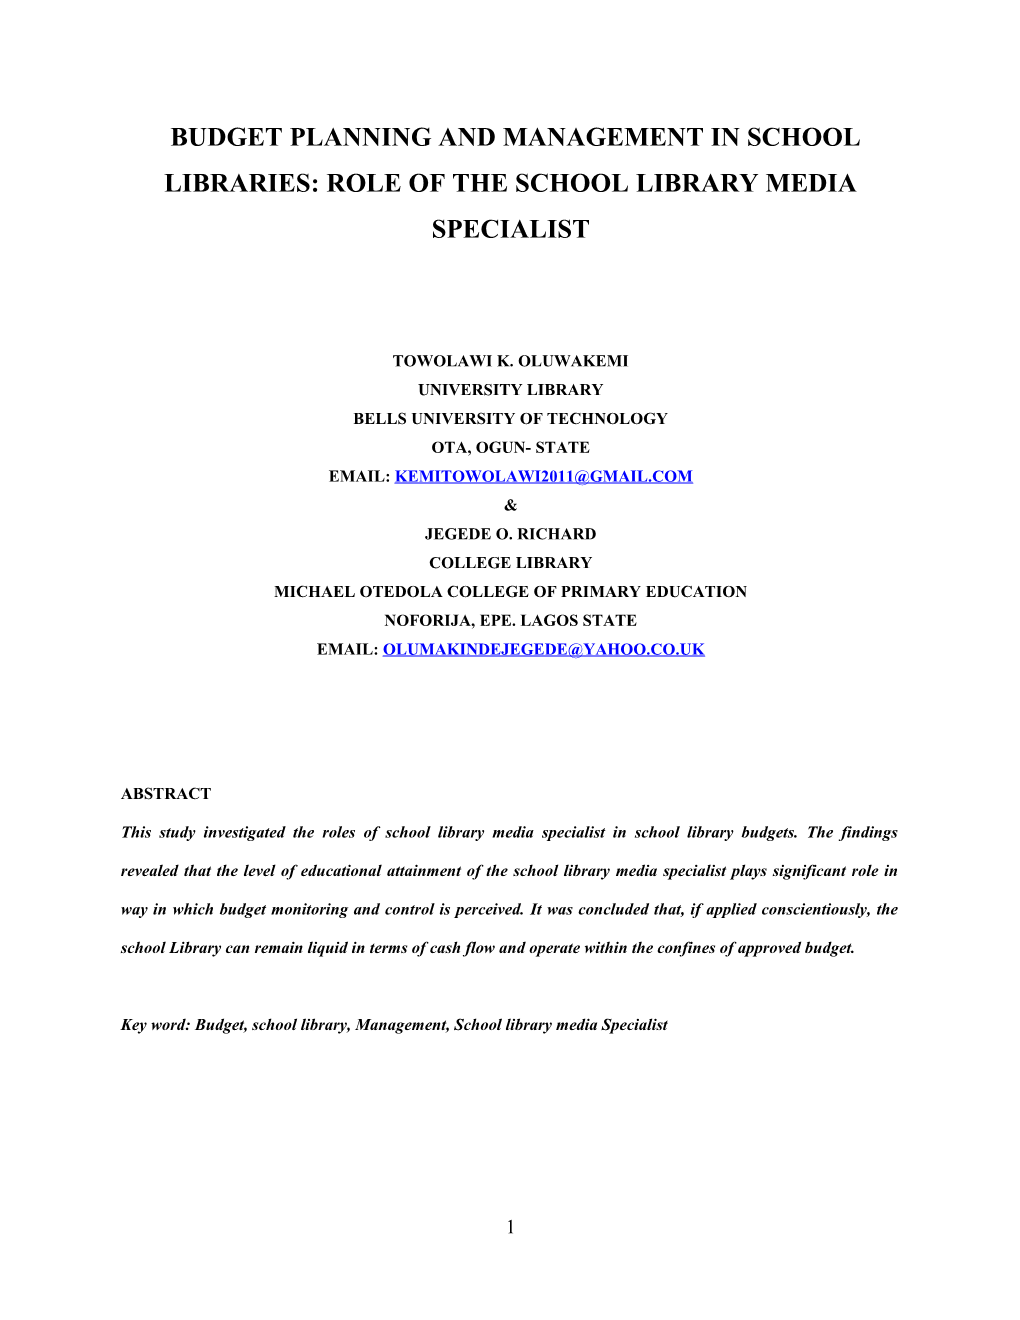 A Comparative Analysis of Budget Palnning and Management in Academic Libraries in Lagos